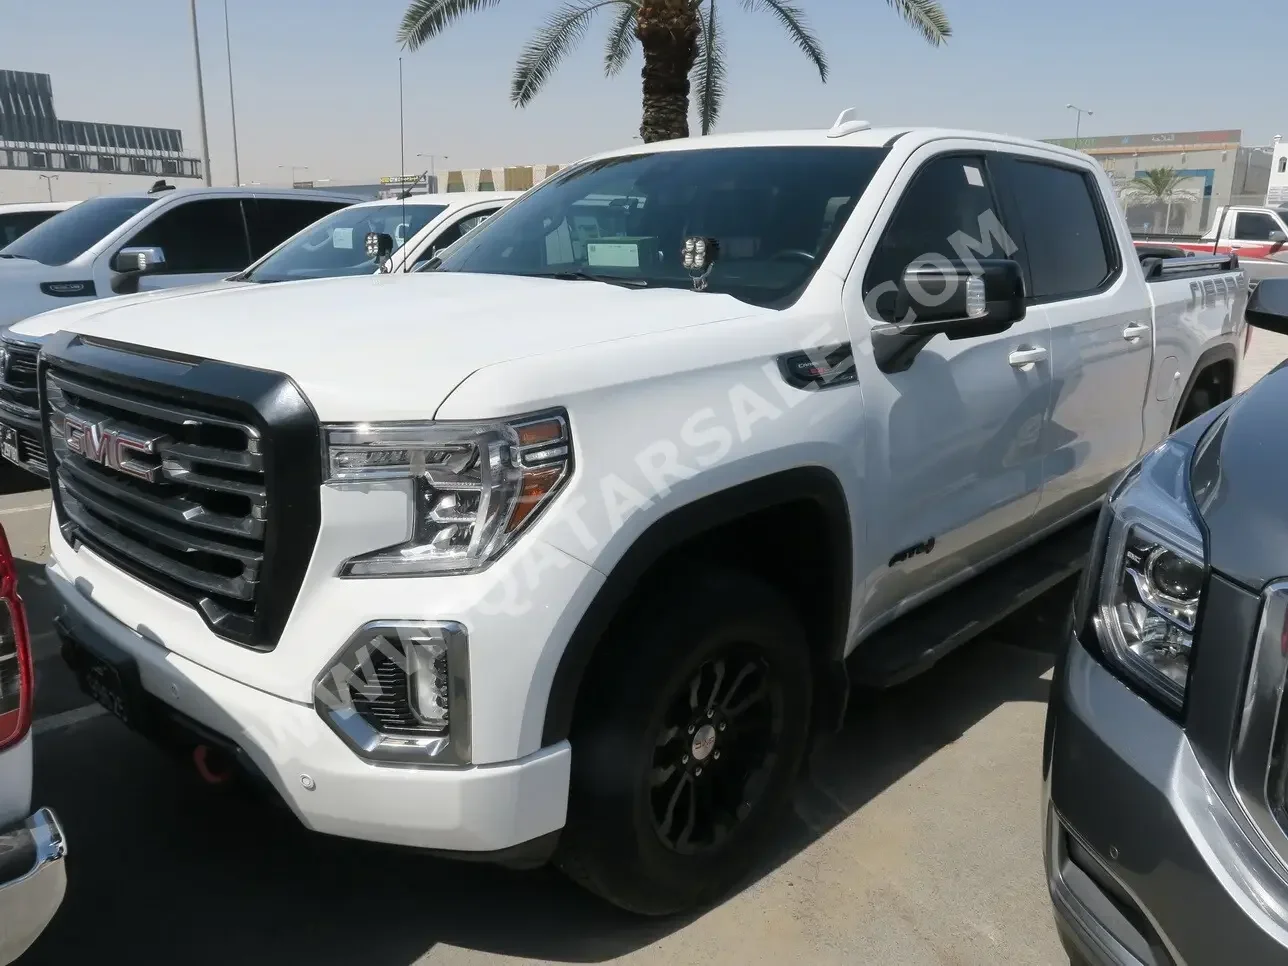  GMC  Sierra  AT4  2020  Automatic  148,000 Km  8 Cylinder  Four Wheel Drive (4WD)  Pick Up  White  With Warranty